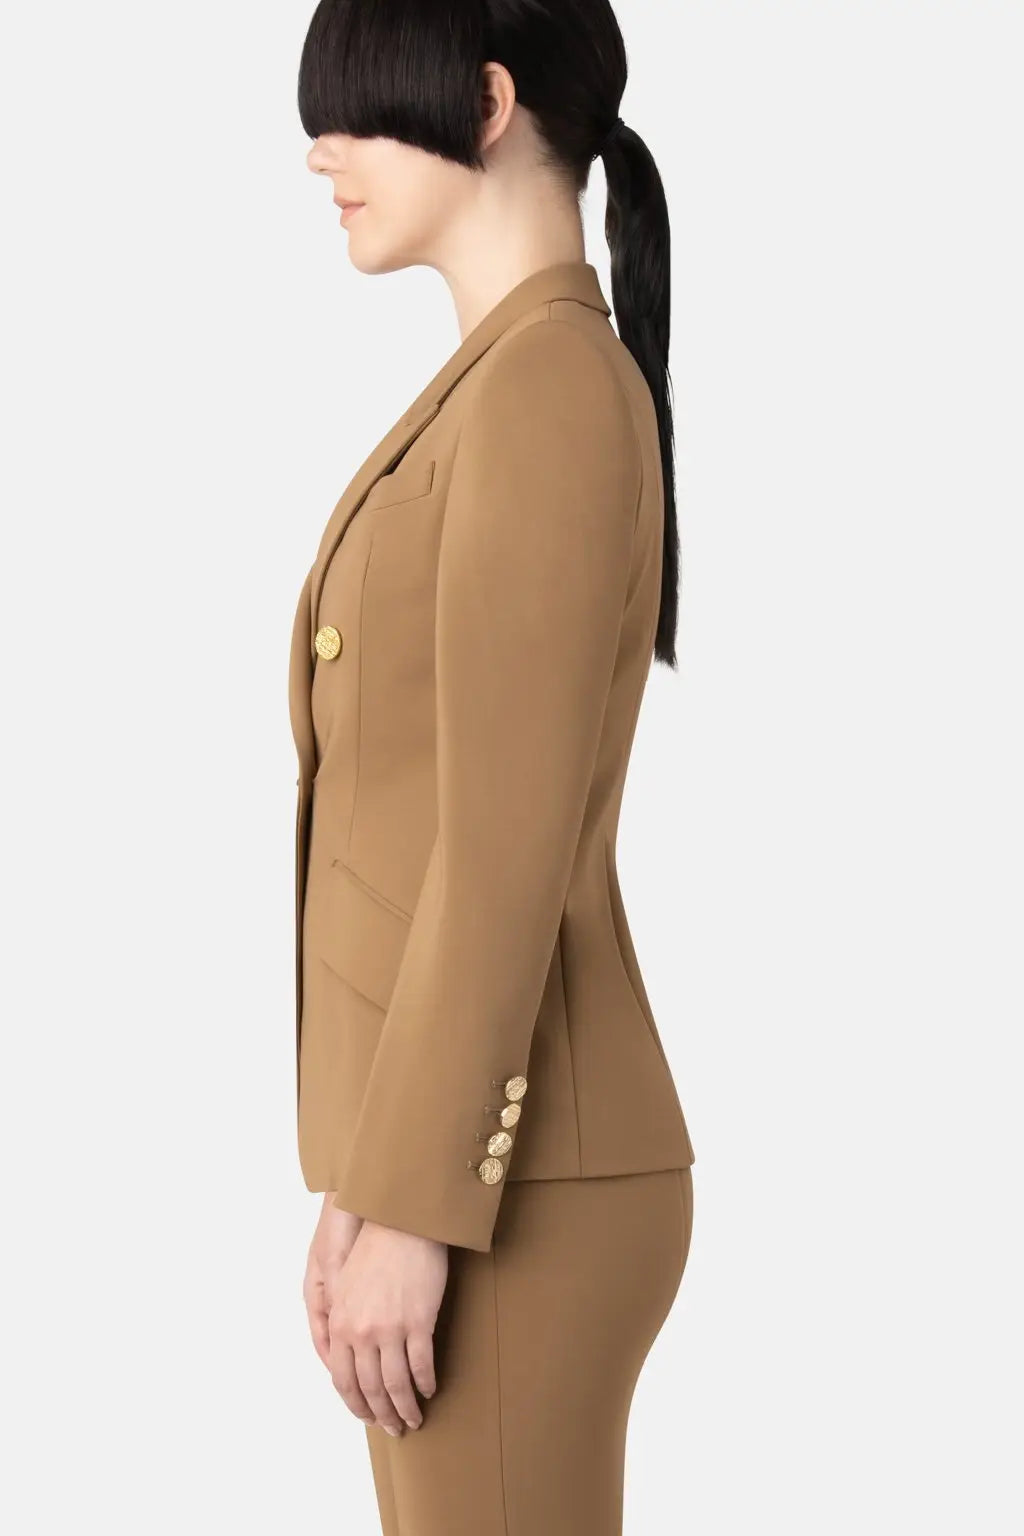 Super Matte Jersey Fitted Double-Breast Blazer - Camel